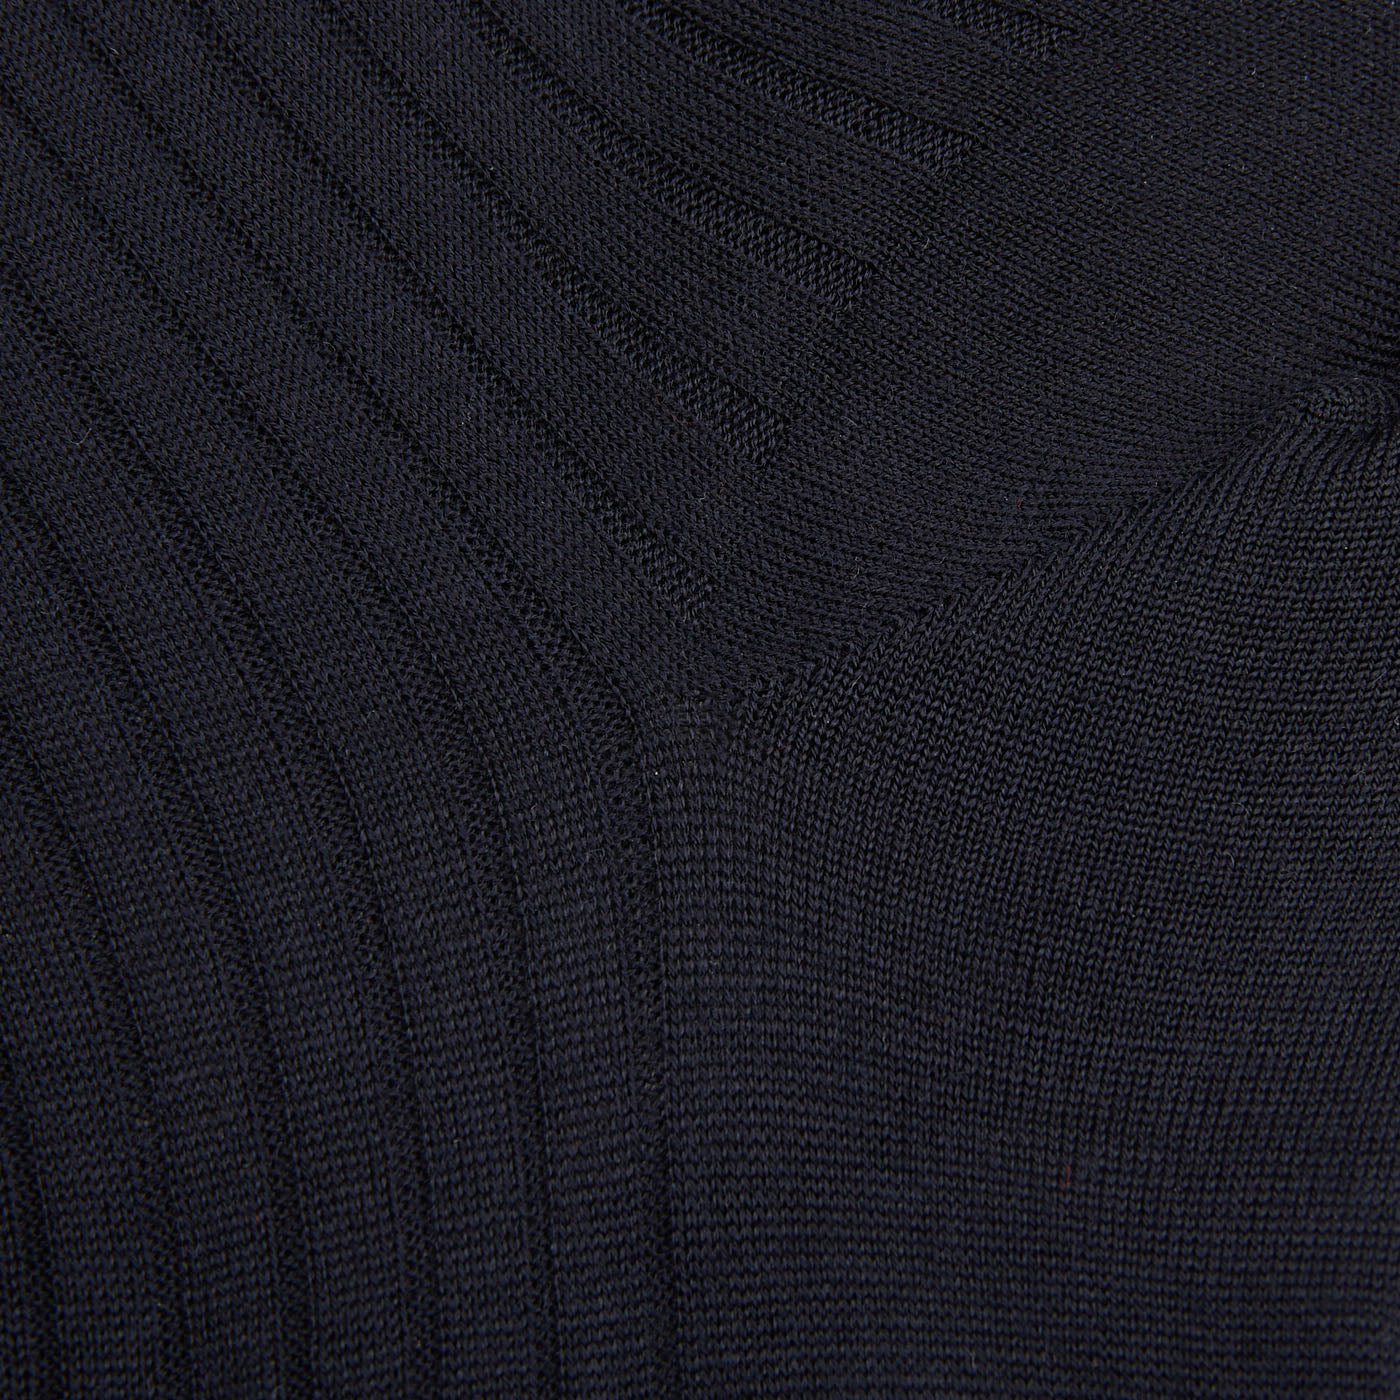 A close up of a black sweater with ribbed cuffs and Bresciani navy blue ribbed wool nylon socks.